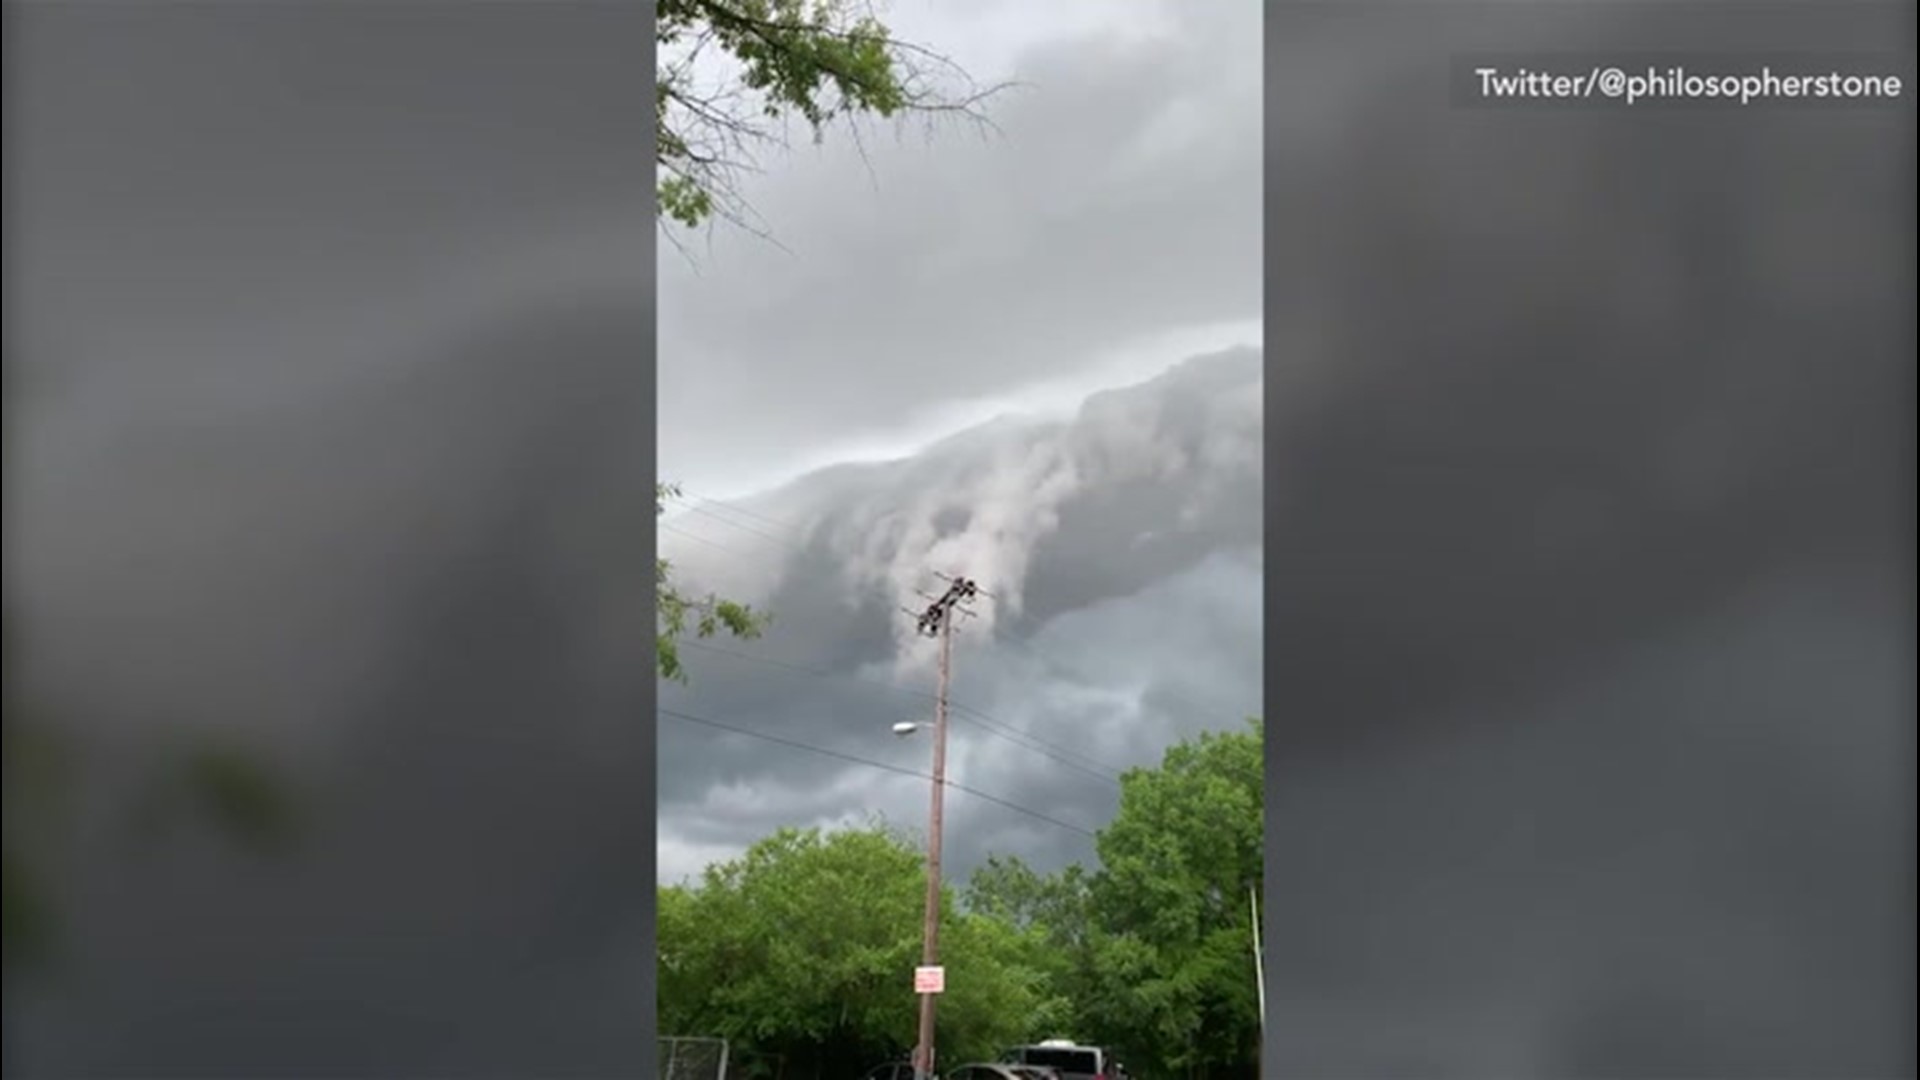 As multiple storms descend on parts of Alabama on June 22, the town of Birmingham got an ill omen as a dark, spooky cloud quickly covered the sky.